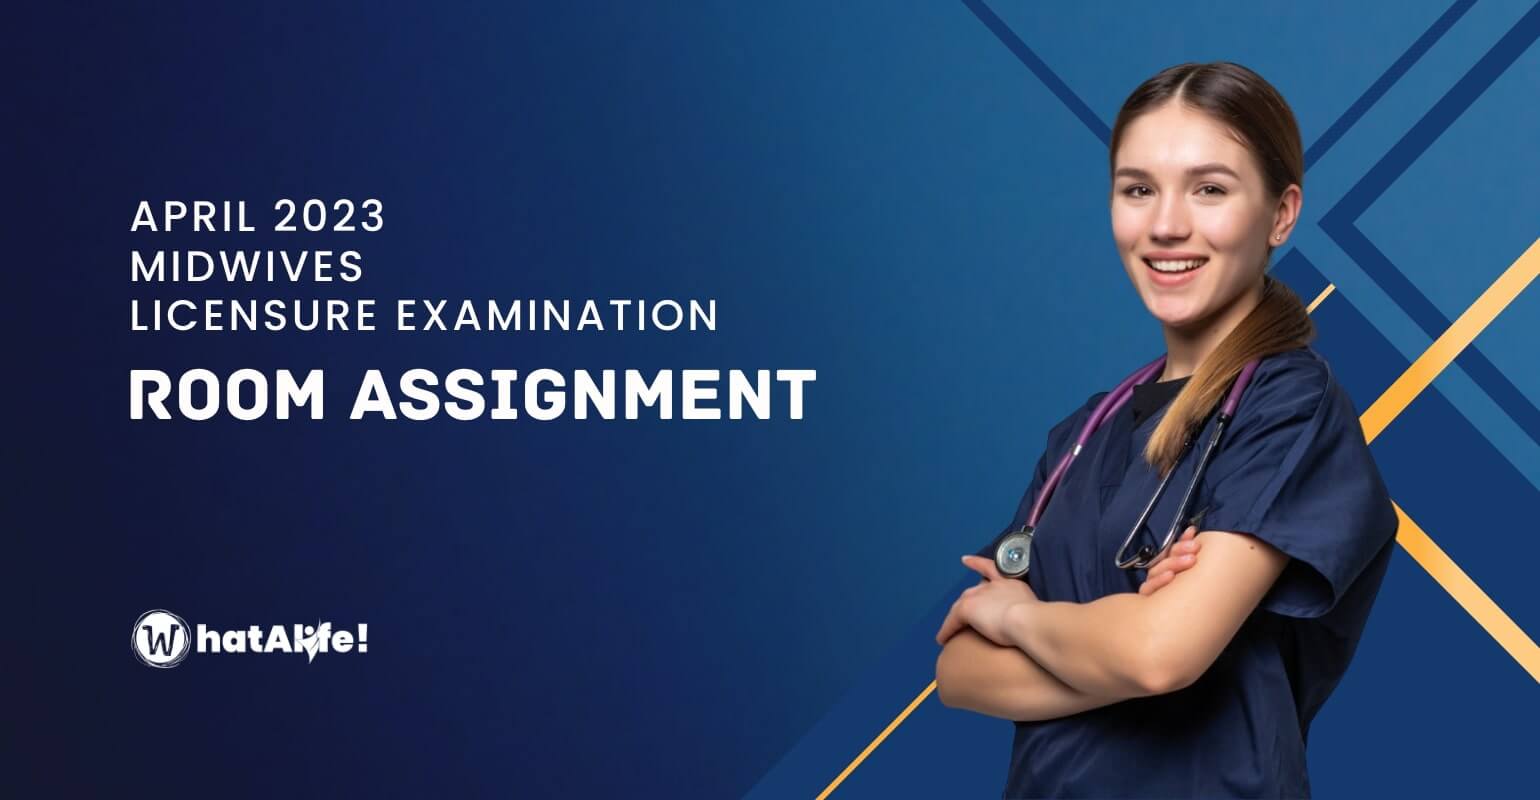 Room Assignment —  April 2023 Midwives Licensure Exam